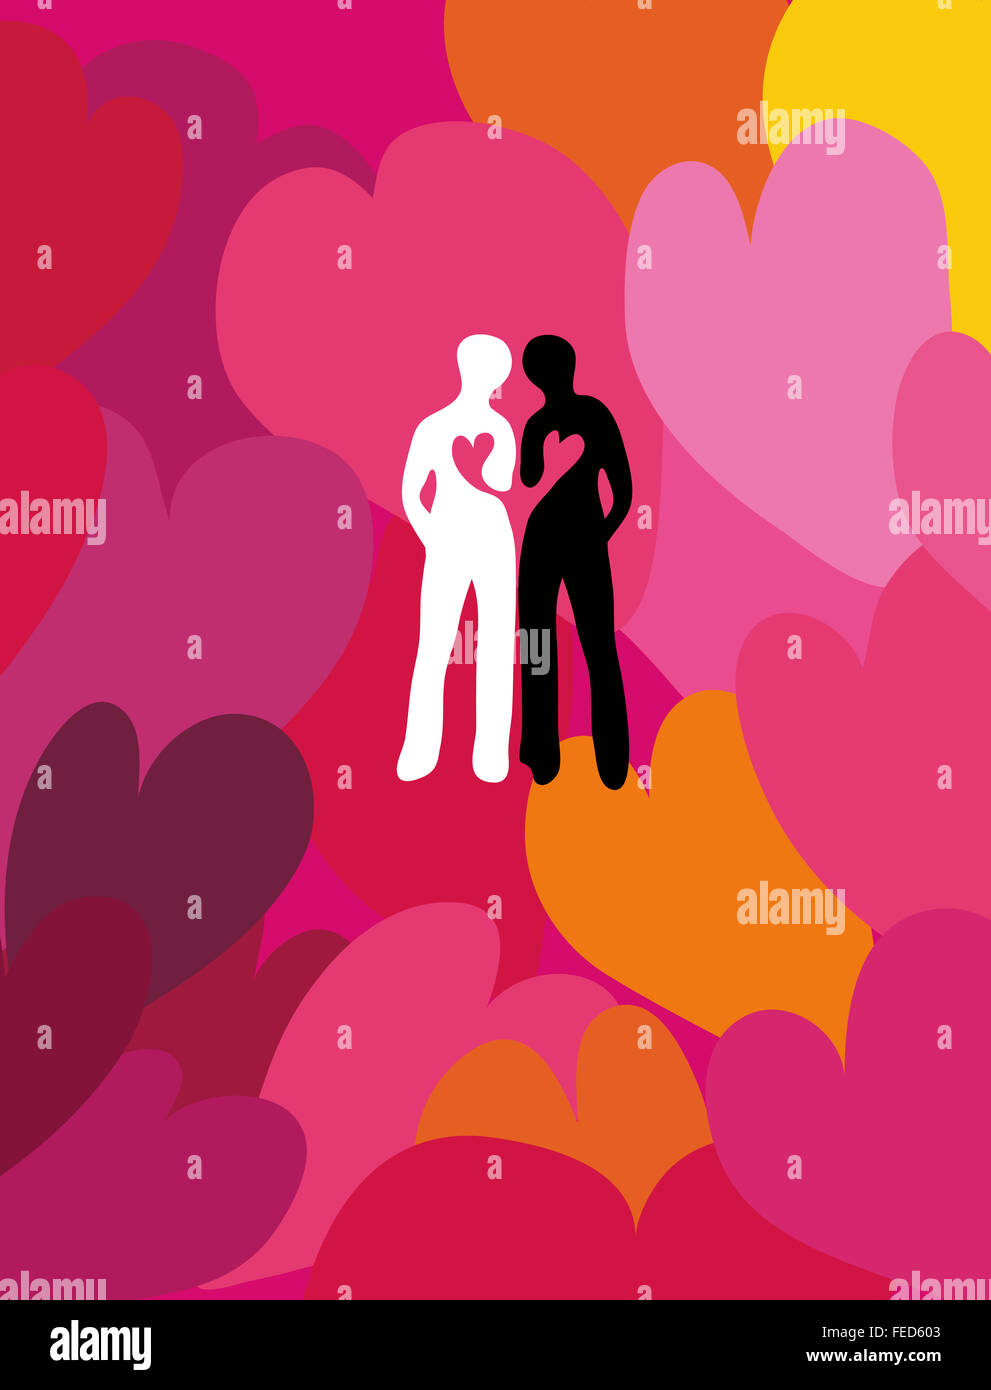 Loving friendship. Connected silhouettes of two people surrounded by hearts. Stock Photo